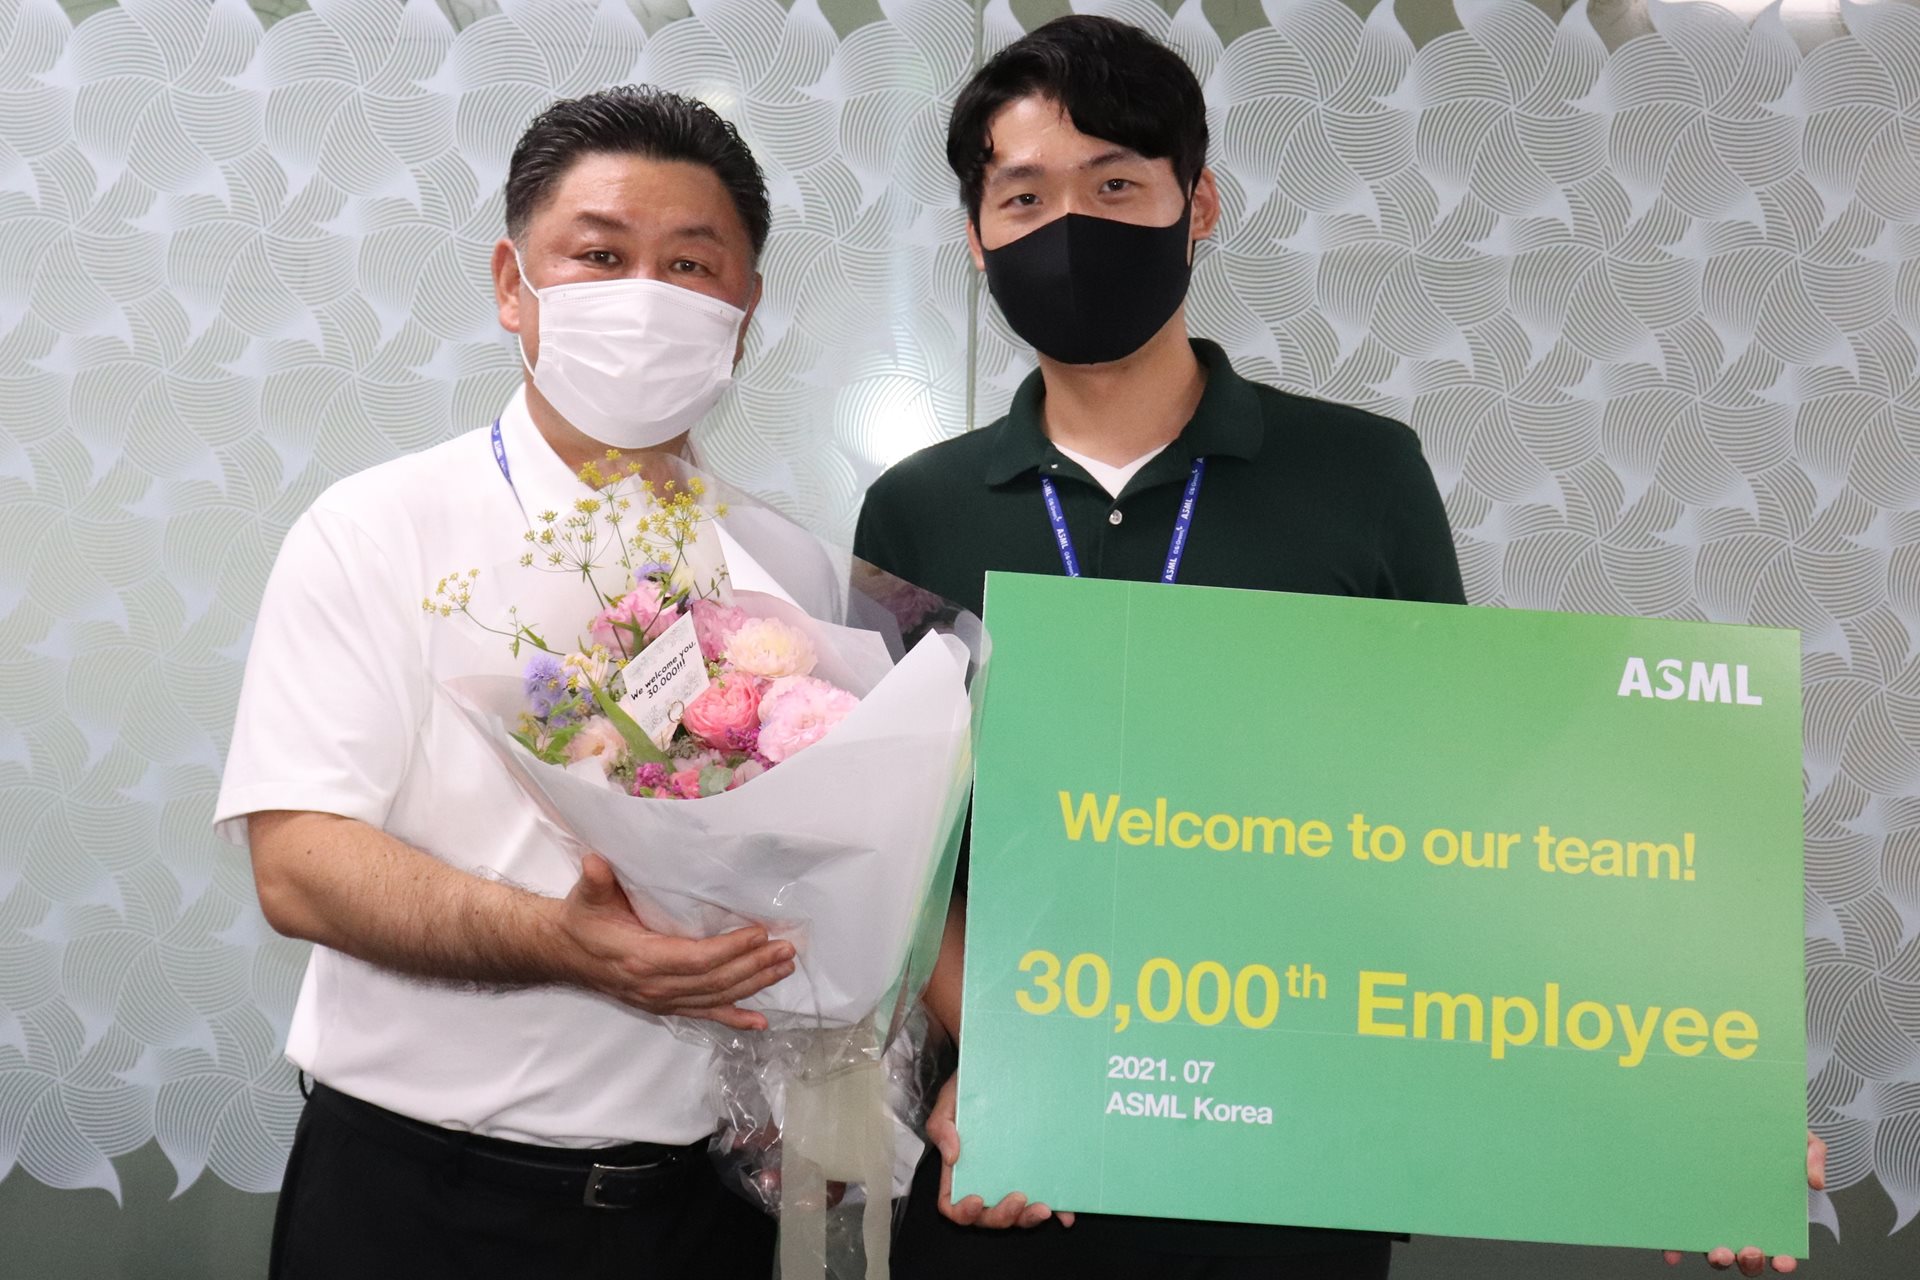 Han-Jun Lee, customer support engineer in South Korea, recieves a certificate to celebrate being the 30,000th ASML employee